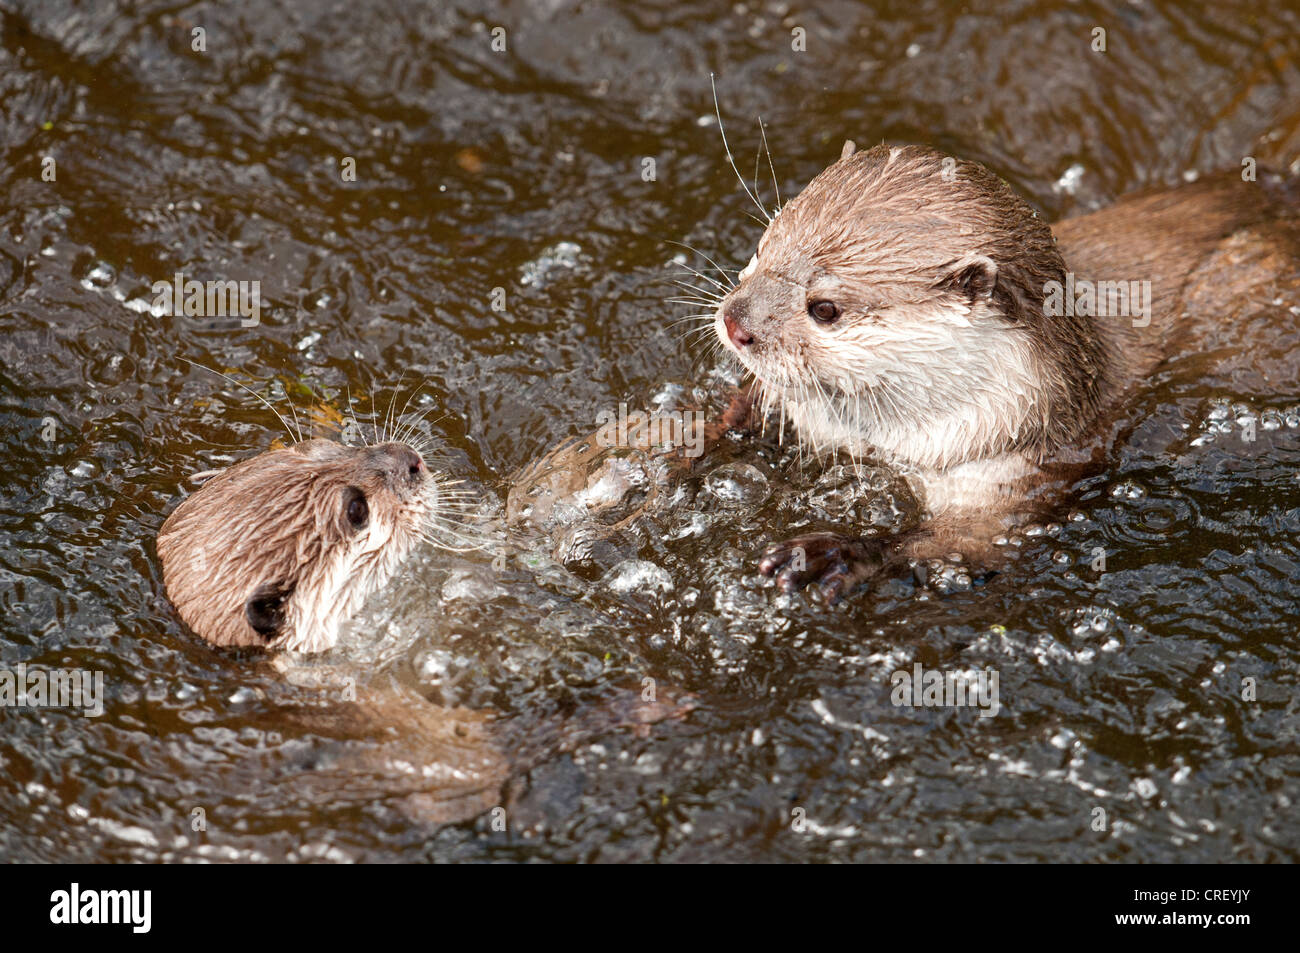 Otters play-fighting in water Stock Photo